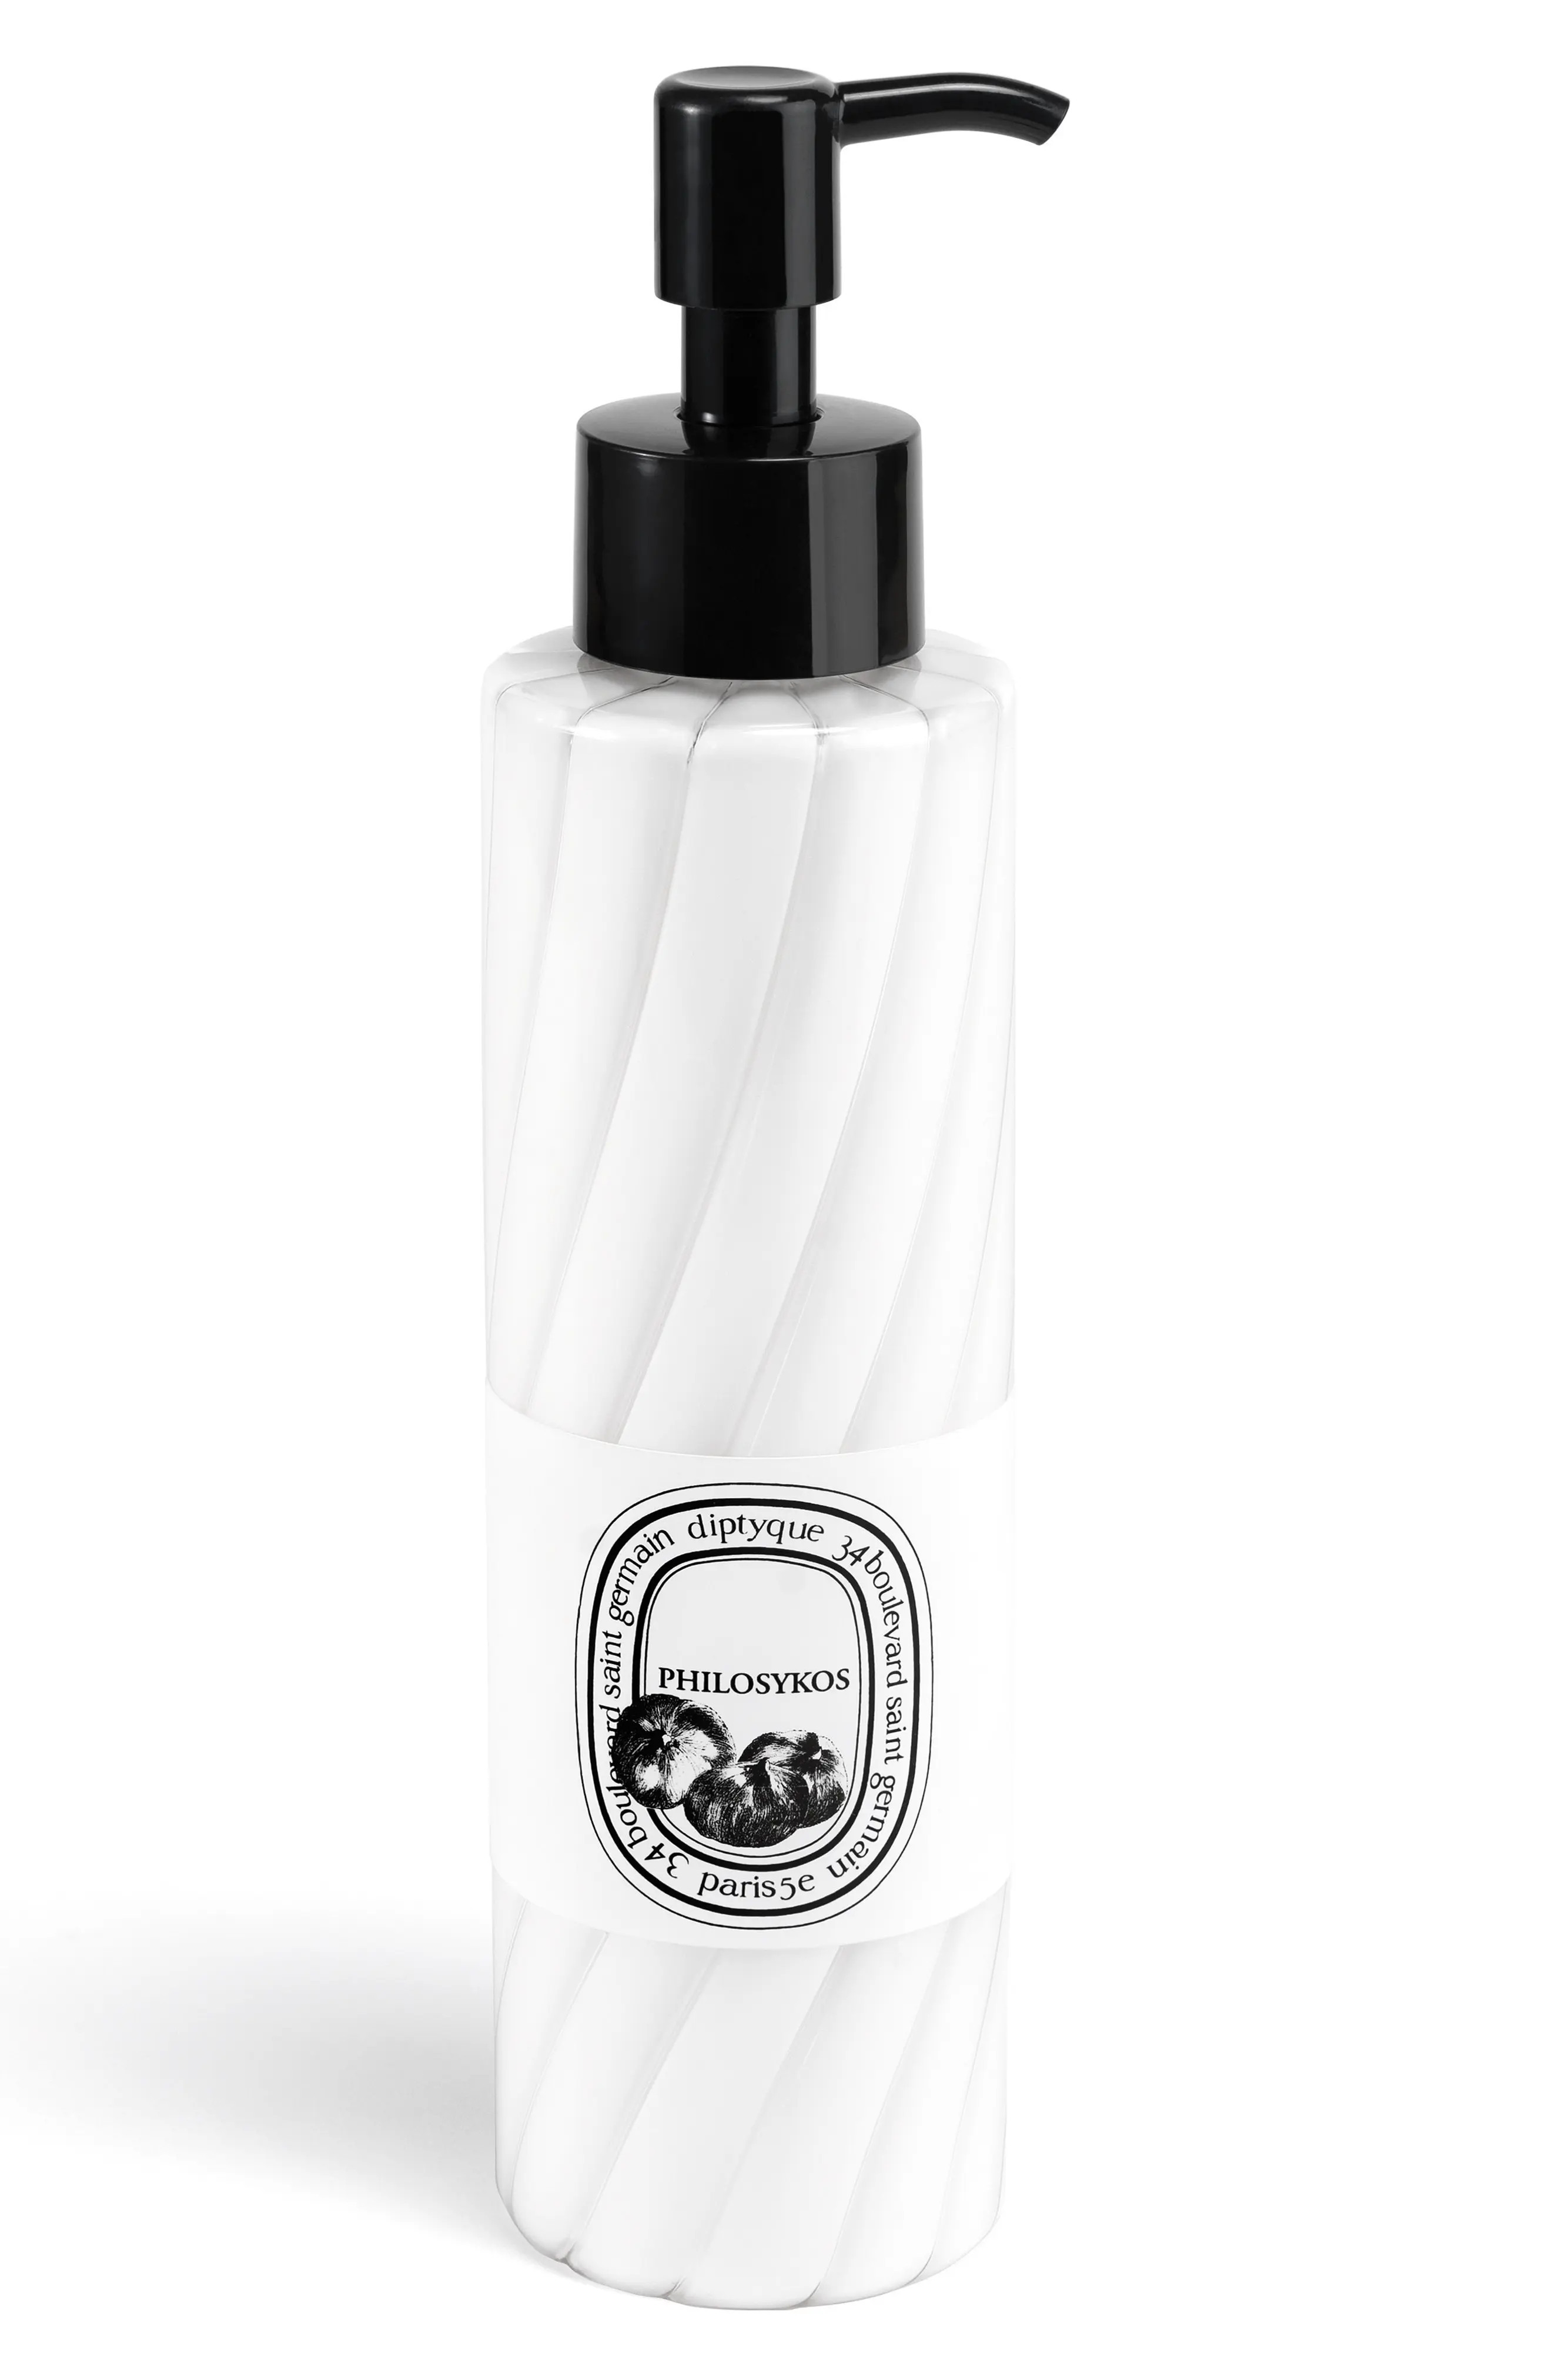 Click for more info about Philosykos Hand & Body Lotion